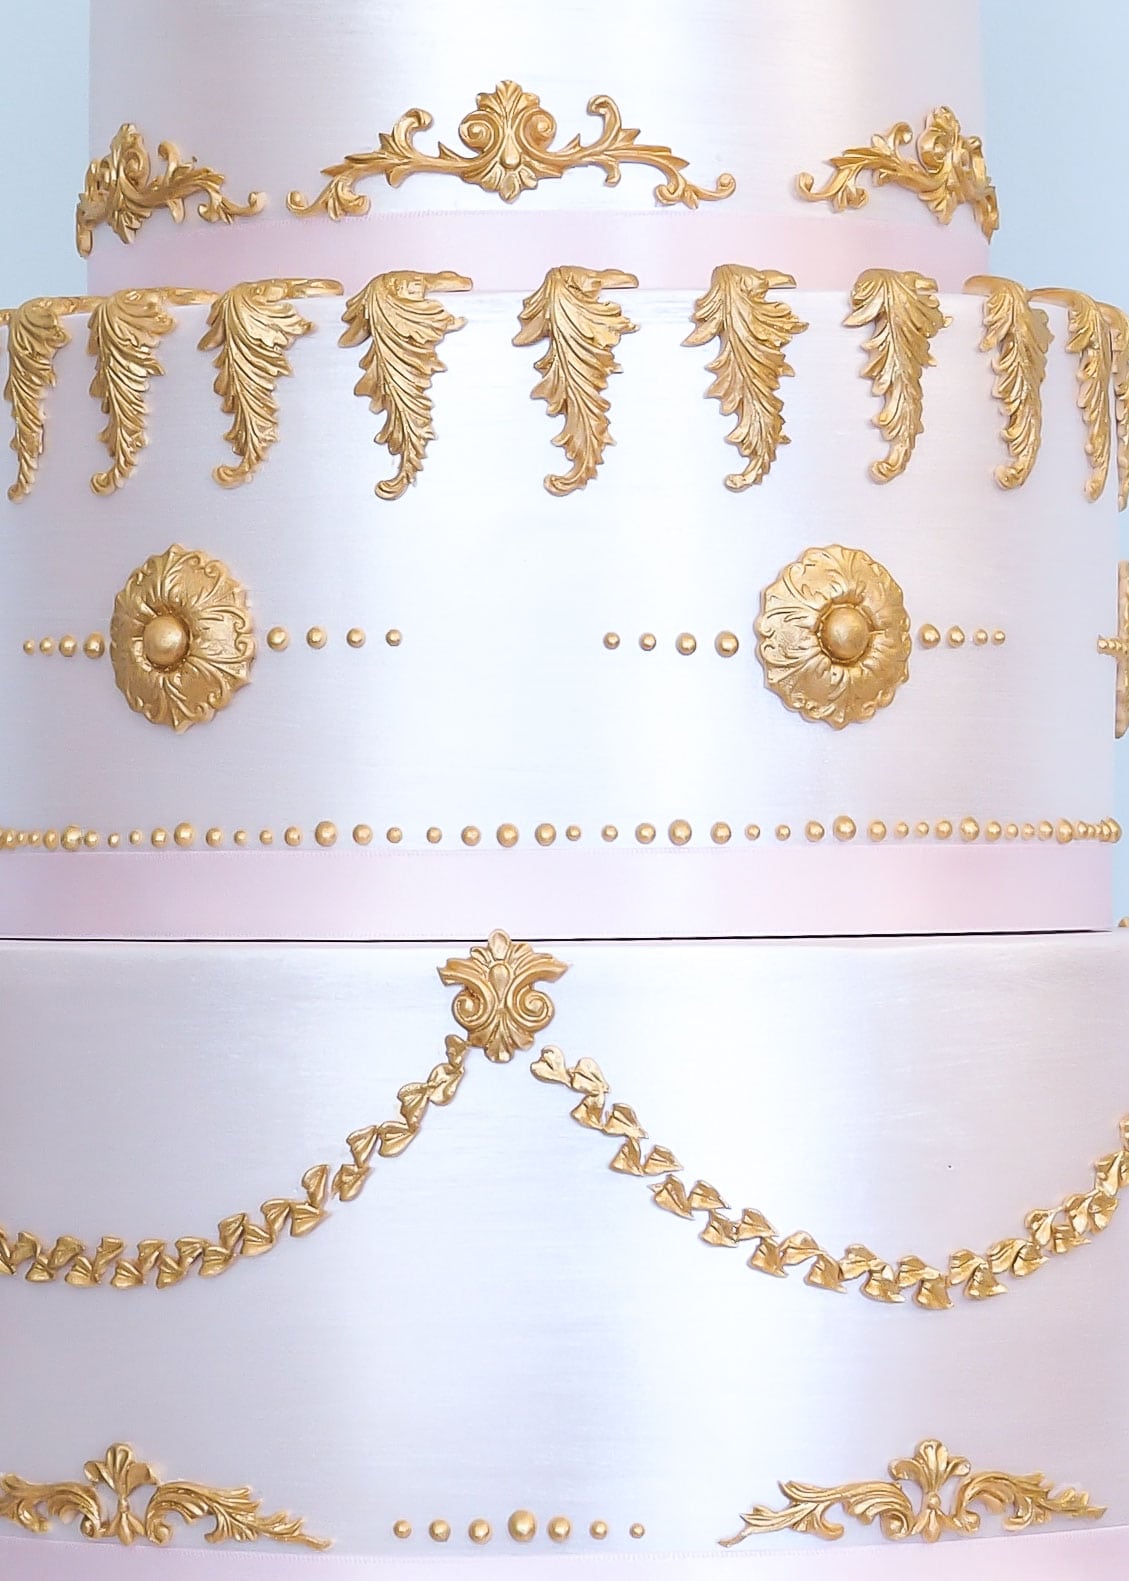 Pink and gold baroque shimmer wedding cake